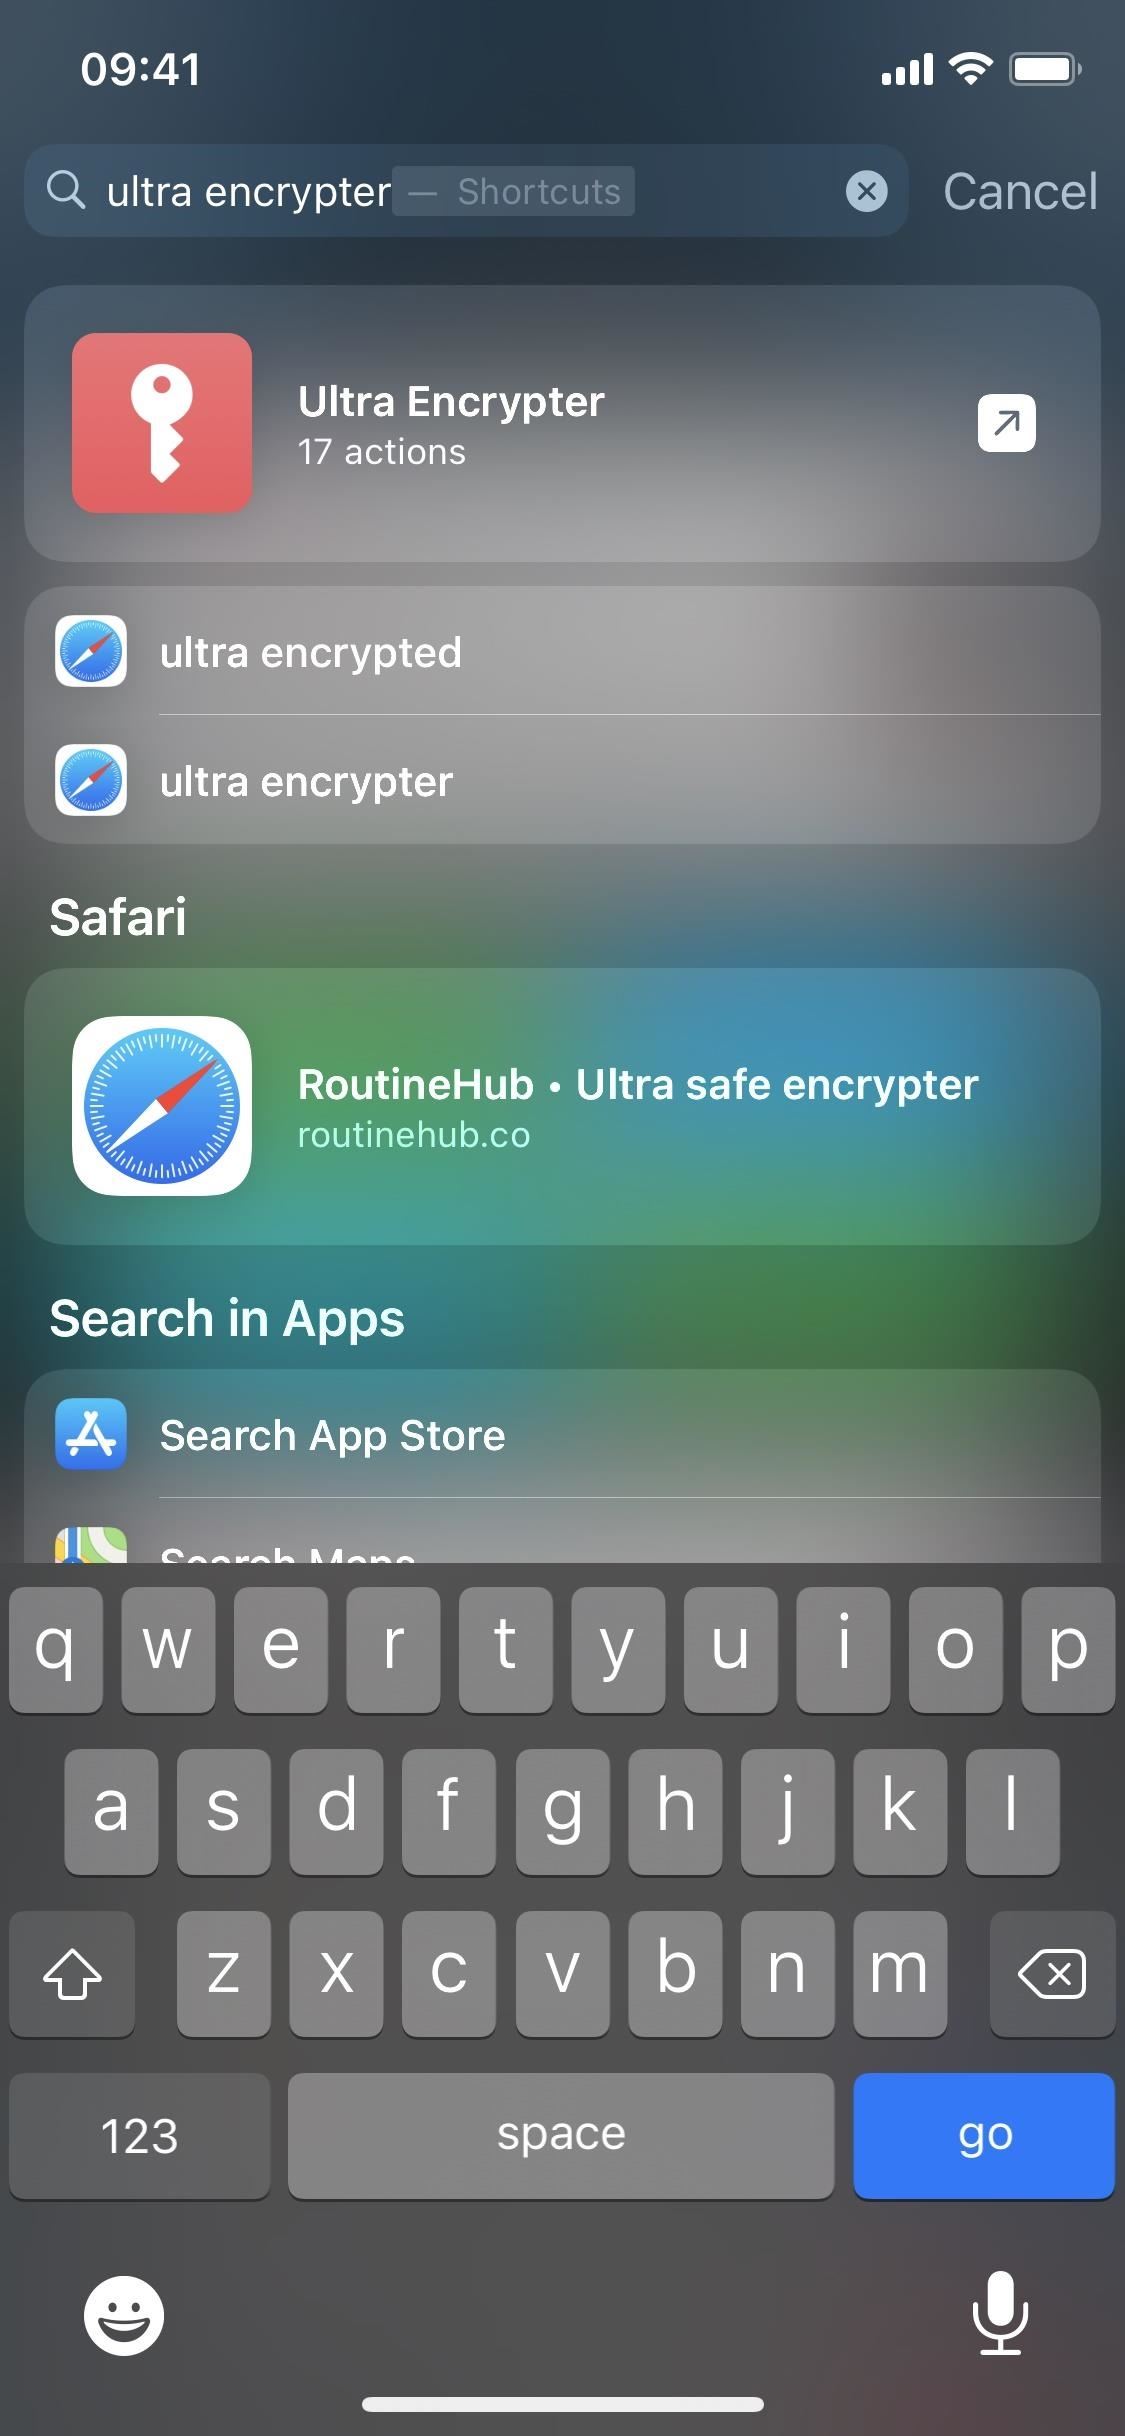 You Can Run Shortcuts Right from Your iPhone's Lock Screen & Here Are 6 Ways to Do It